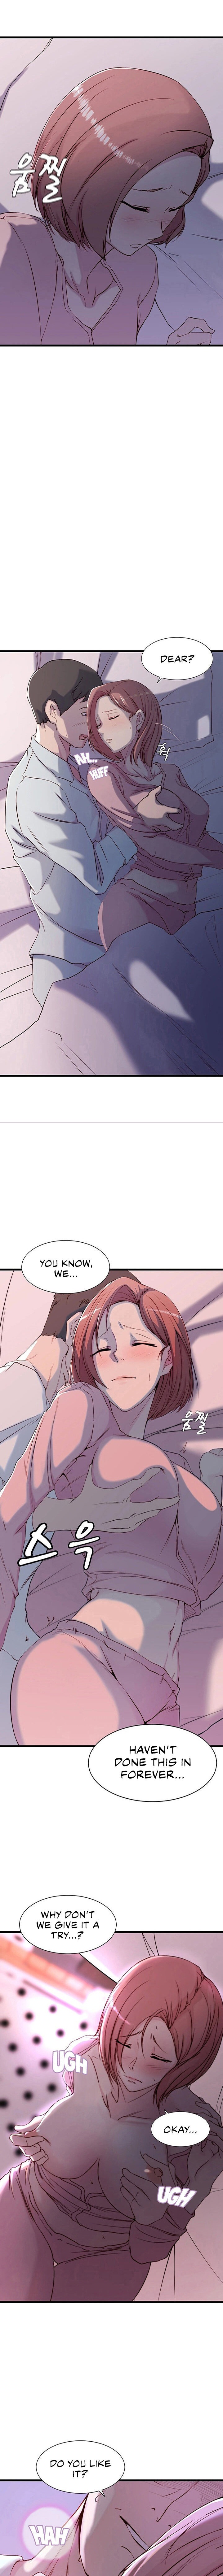 Sister-in-Law Manhwa - Chapter 1 Page 7